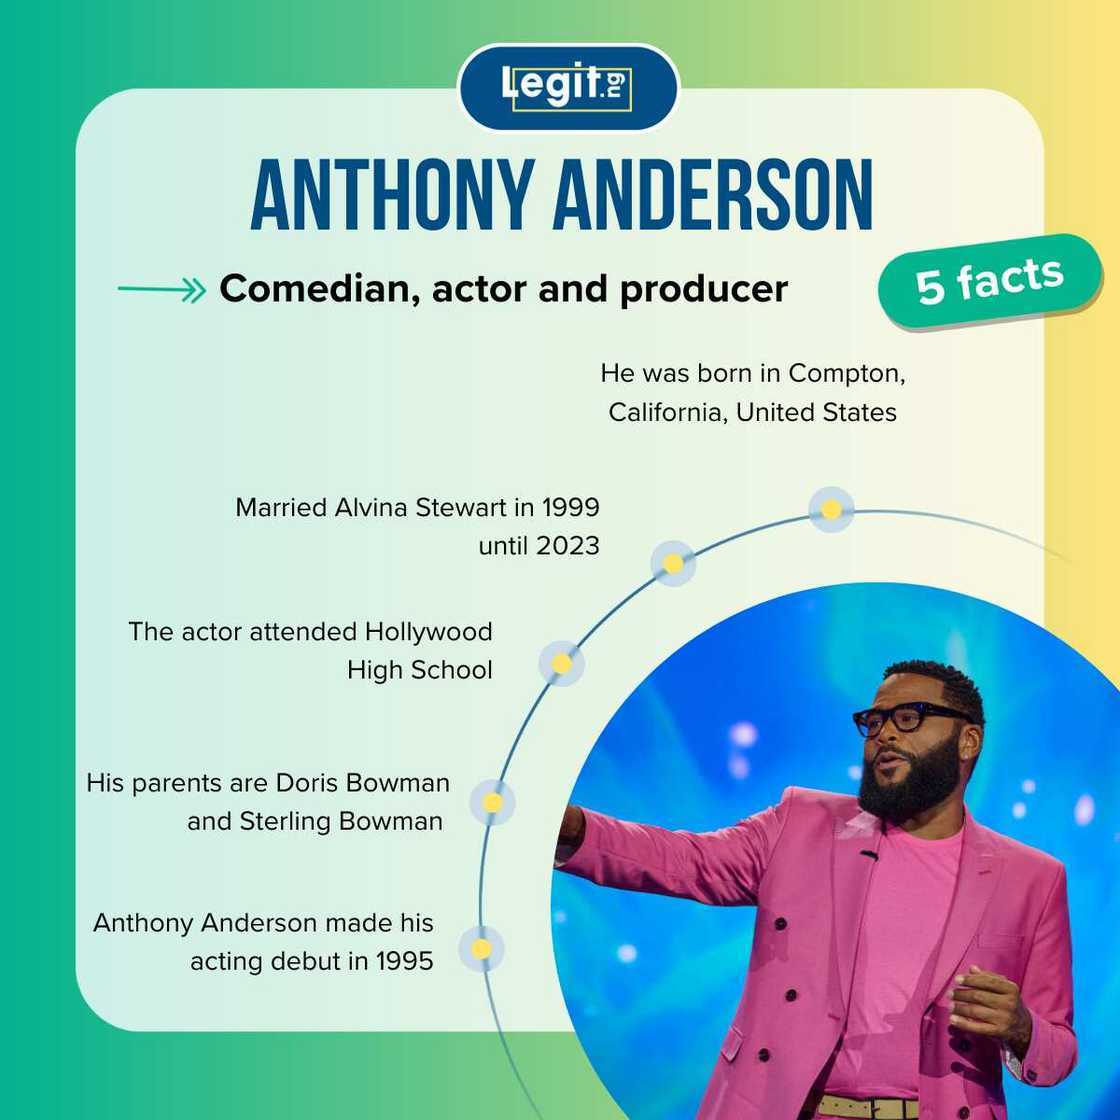 Quick facts about Anthony Anderson